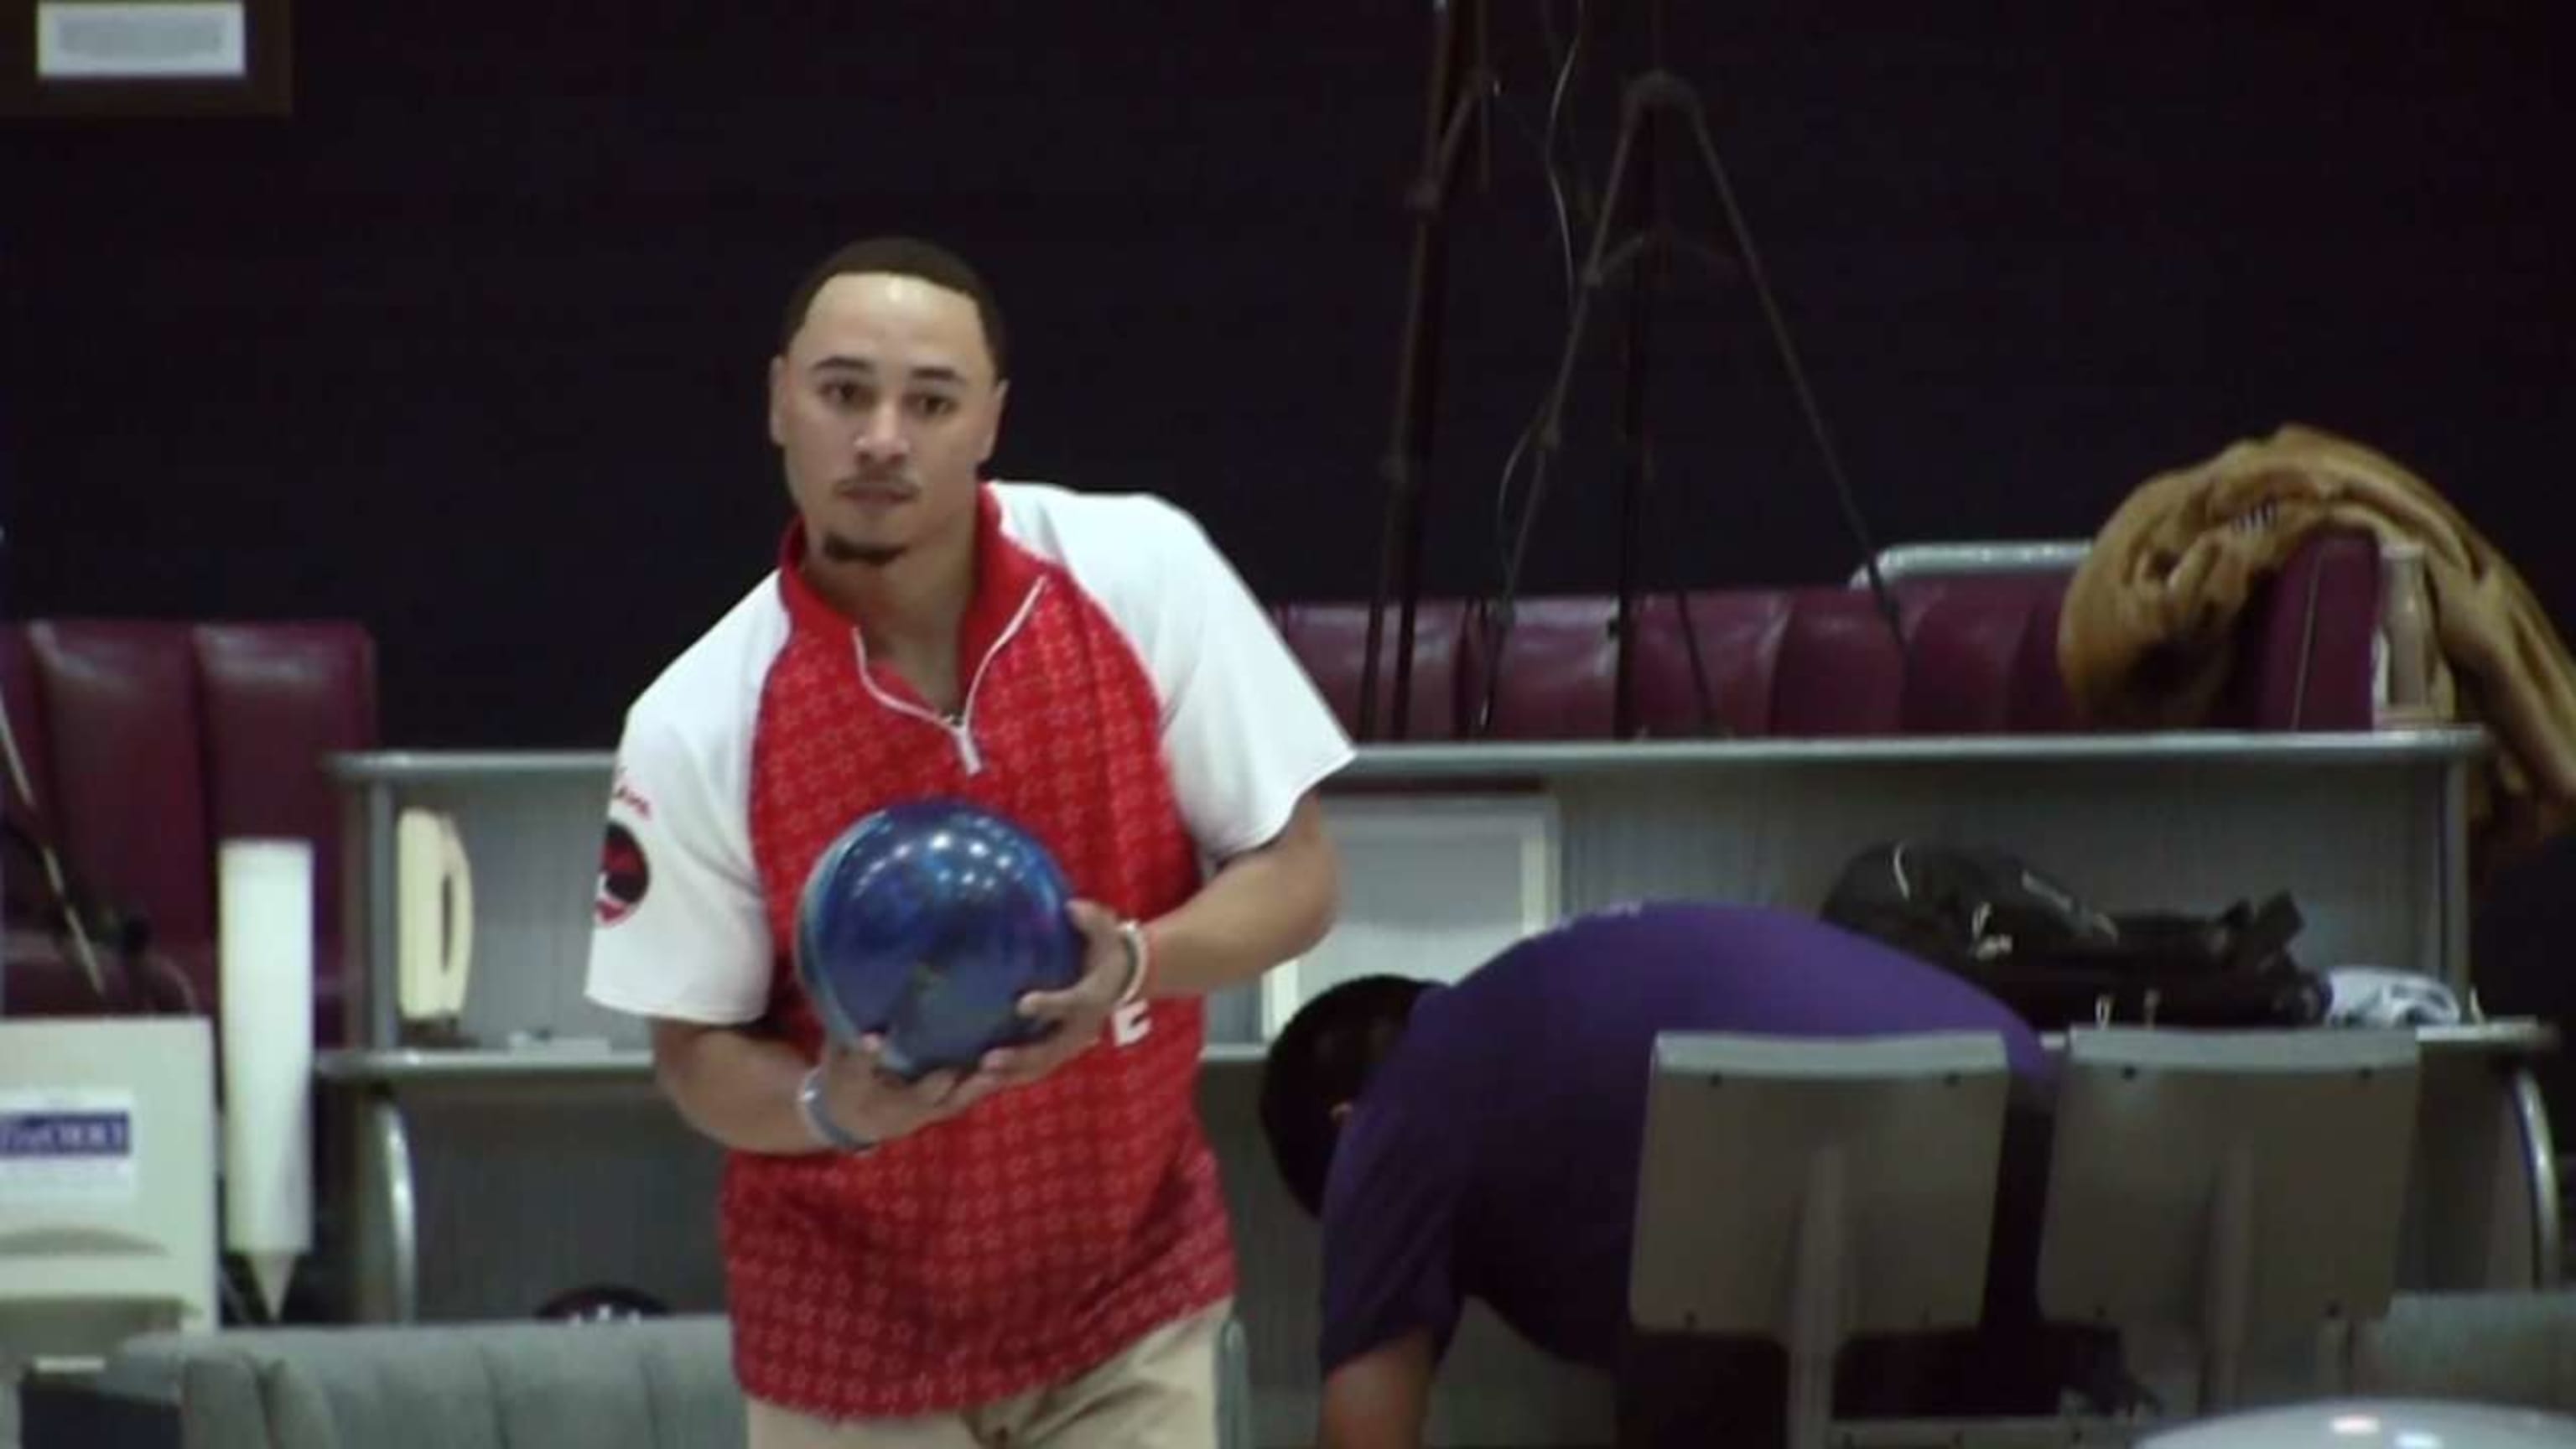 Mookie Betts bowled another perfect game because he's a two-sport superstar